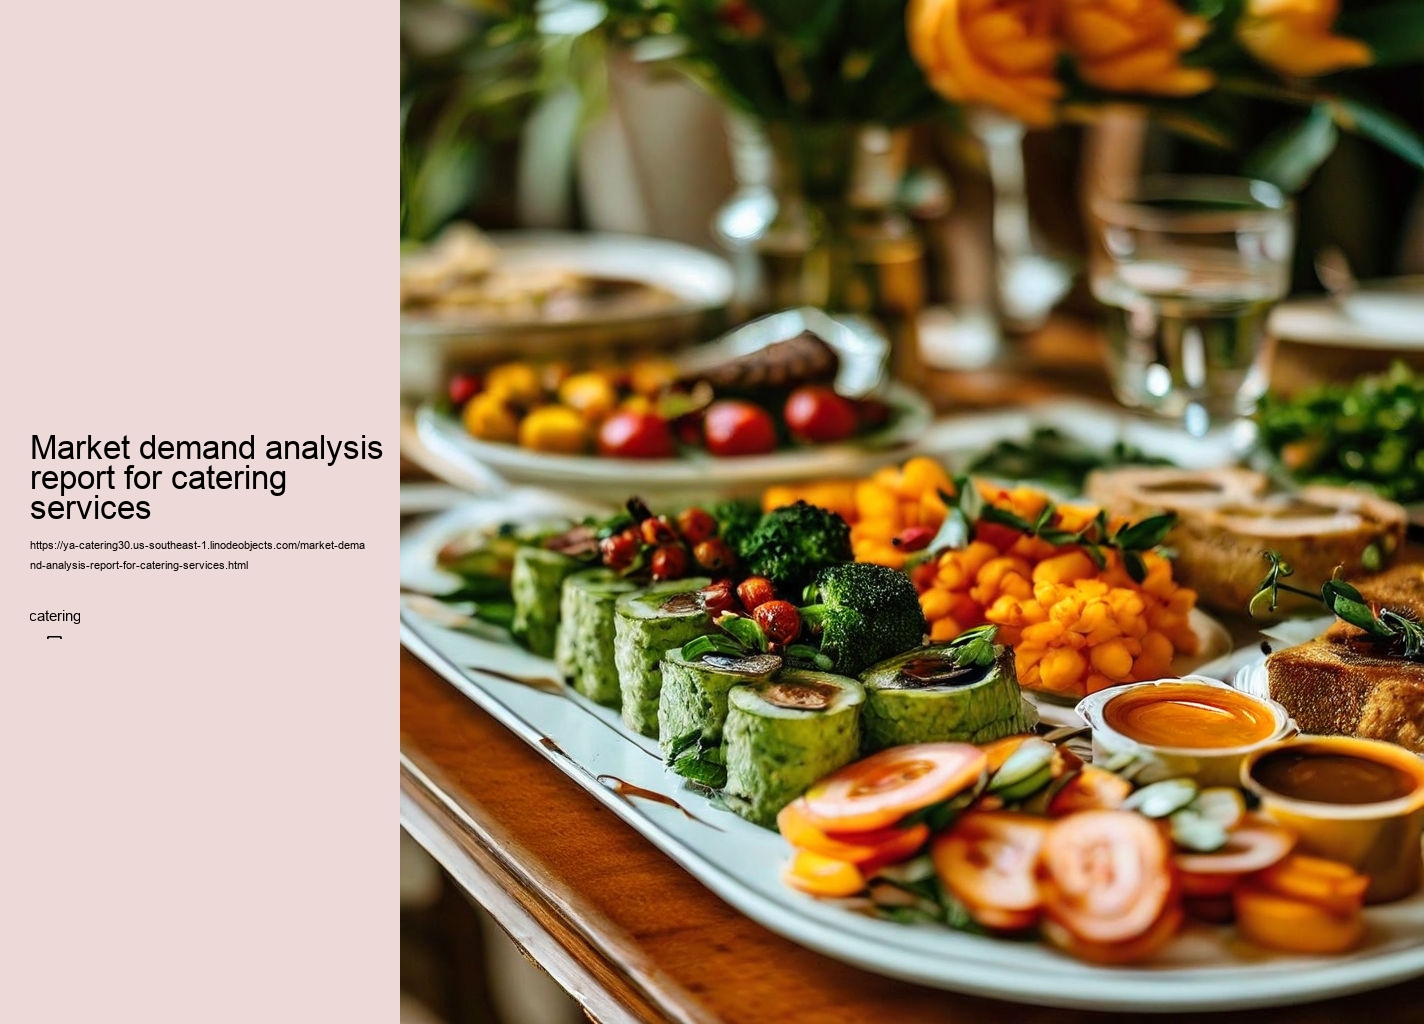 Market demand analysis report for catering services